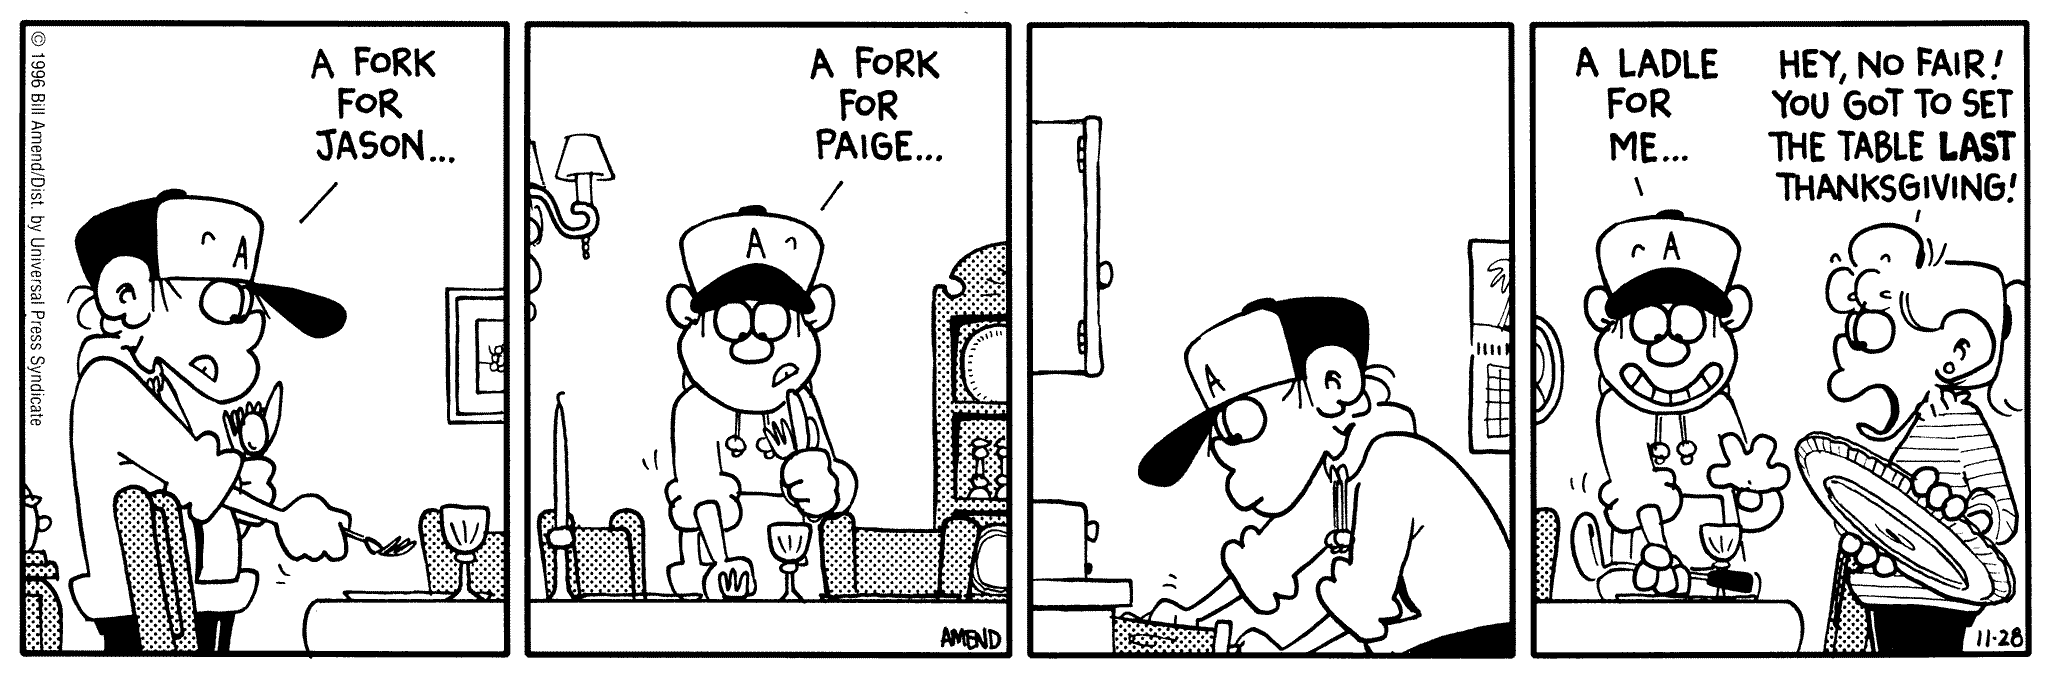 Thanksgiving Comics - FoxTrot comic strip by Bill Amend - Published November 28, 1996 - Transcript: Peter Fox: A fork for Jason.... A fork for Paige..A ladle for me... Paige Fox: Hey, no fair! You got to set the table last Thanksgiving!